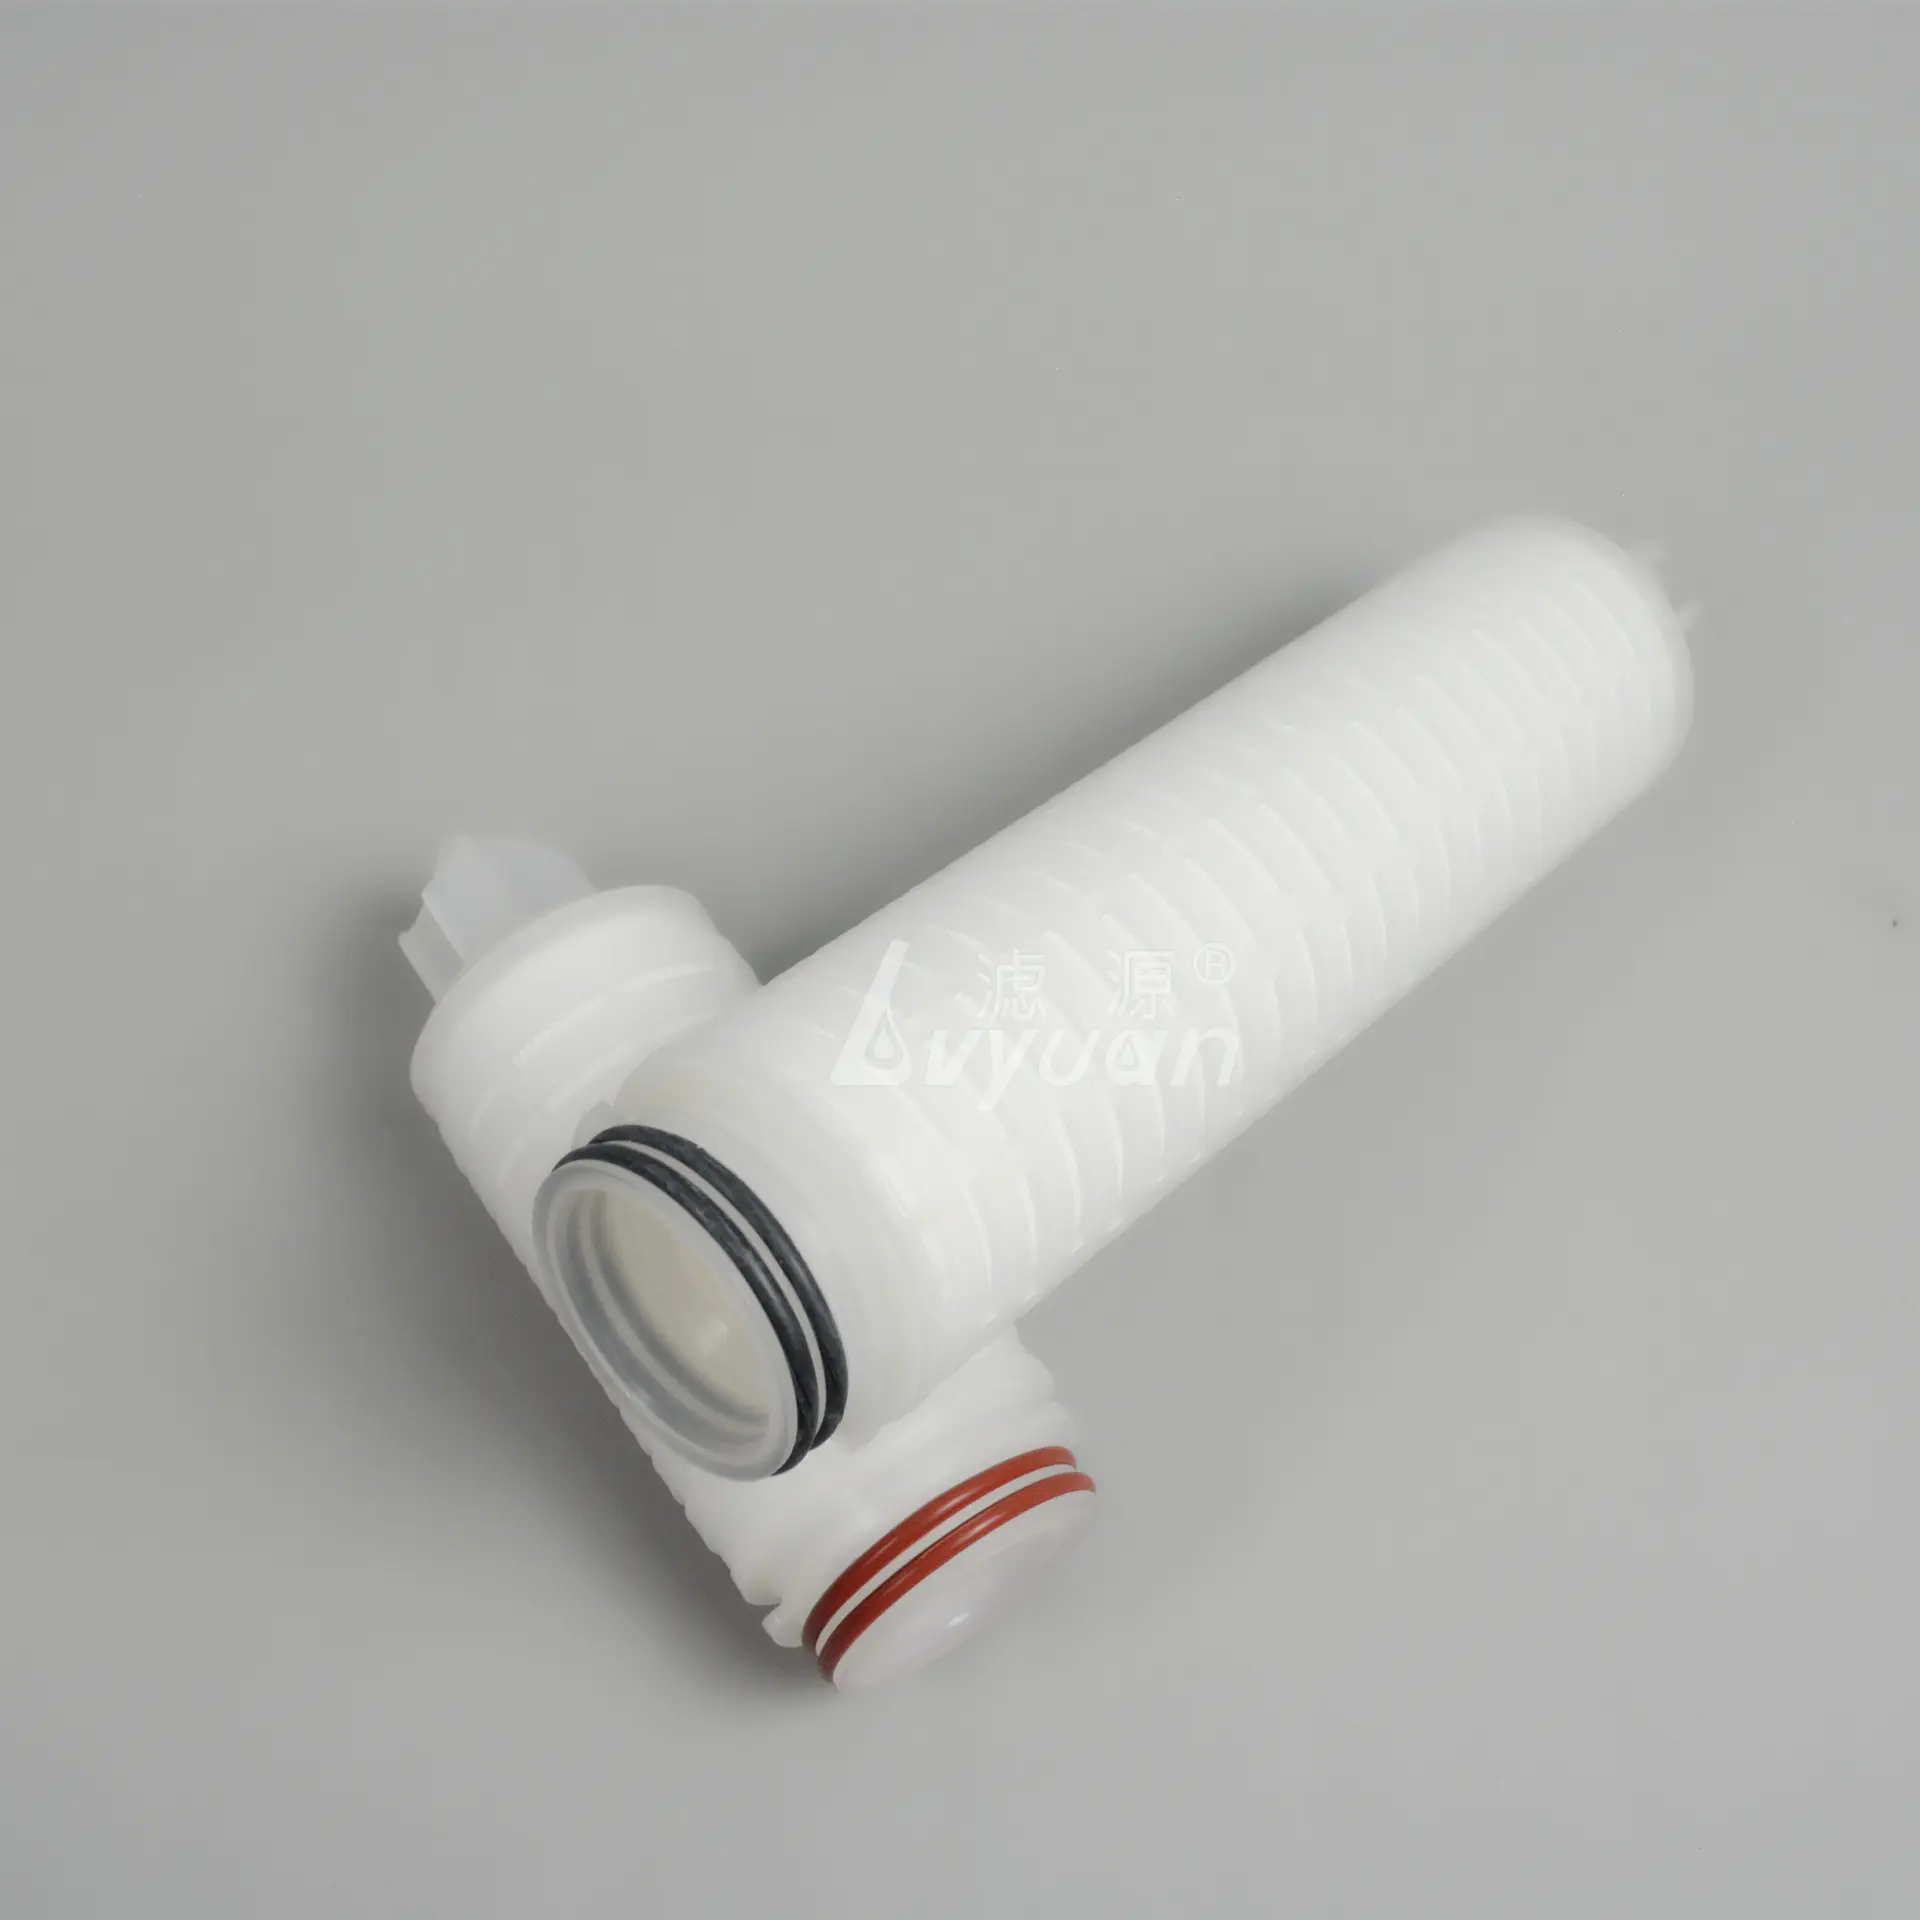 Good price 0.22 um pvdf membrane filter/pleated filter cartridge for beer/wine filtration